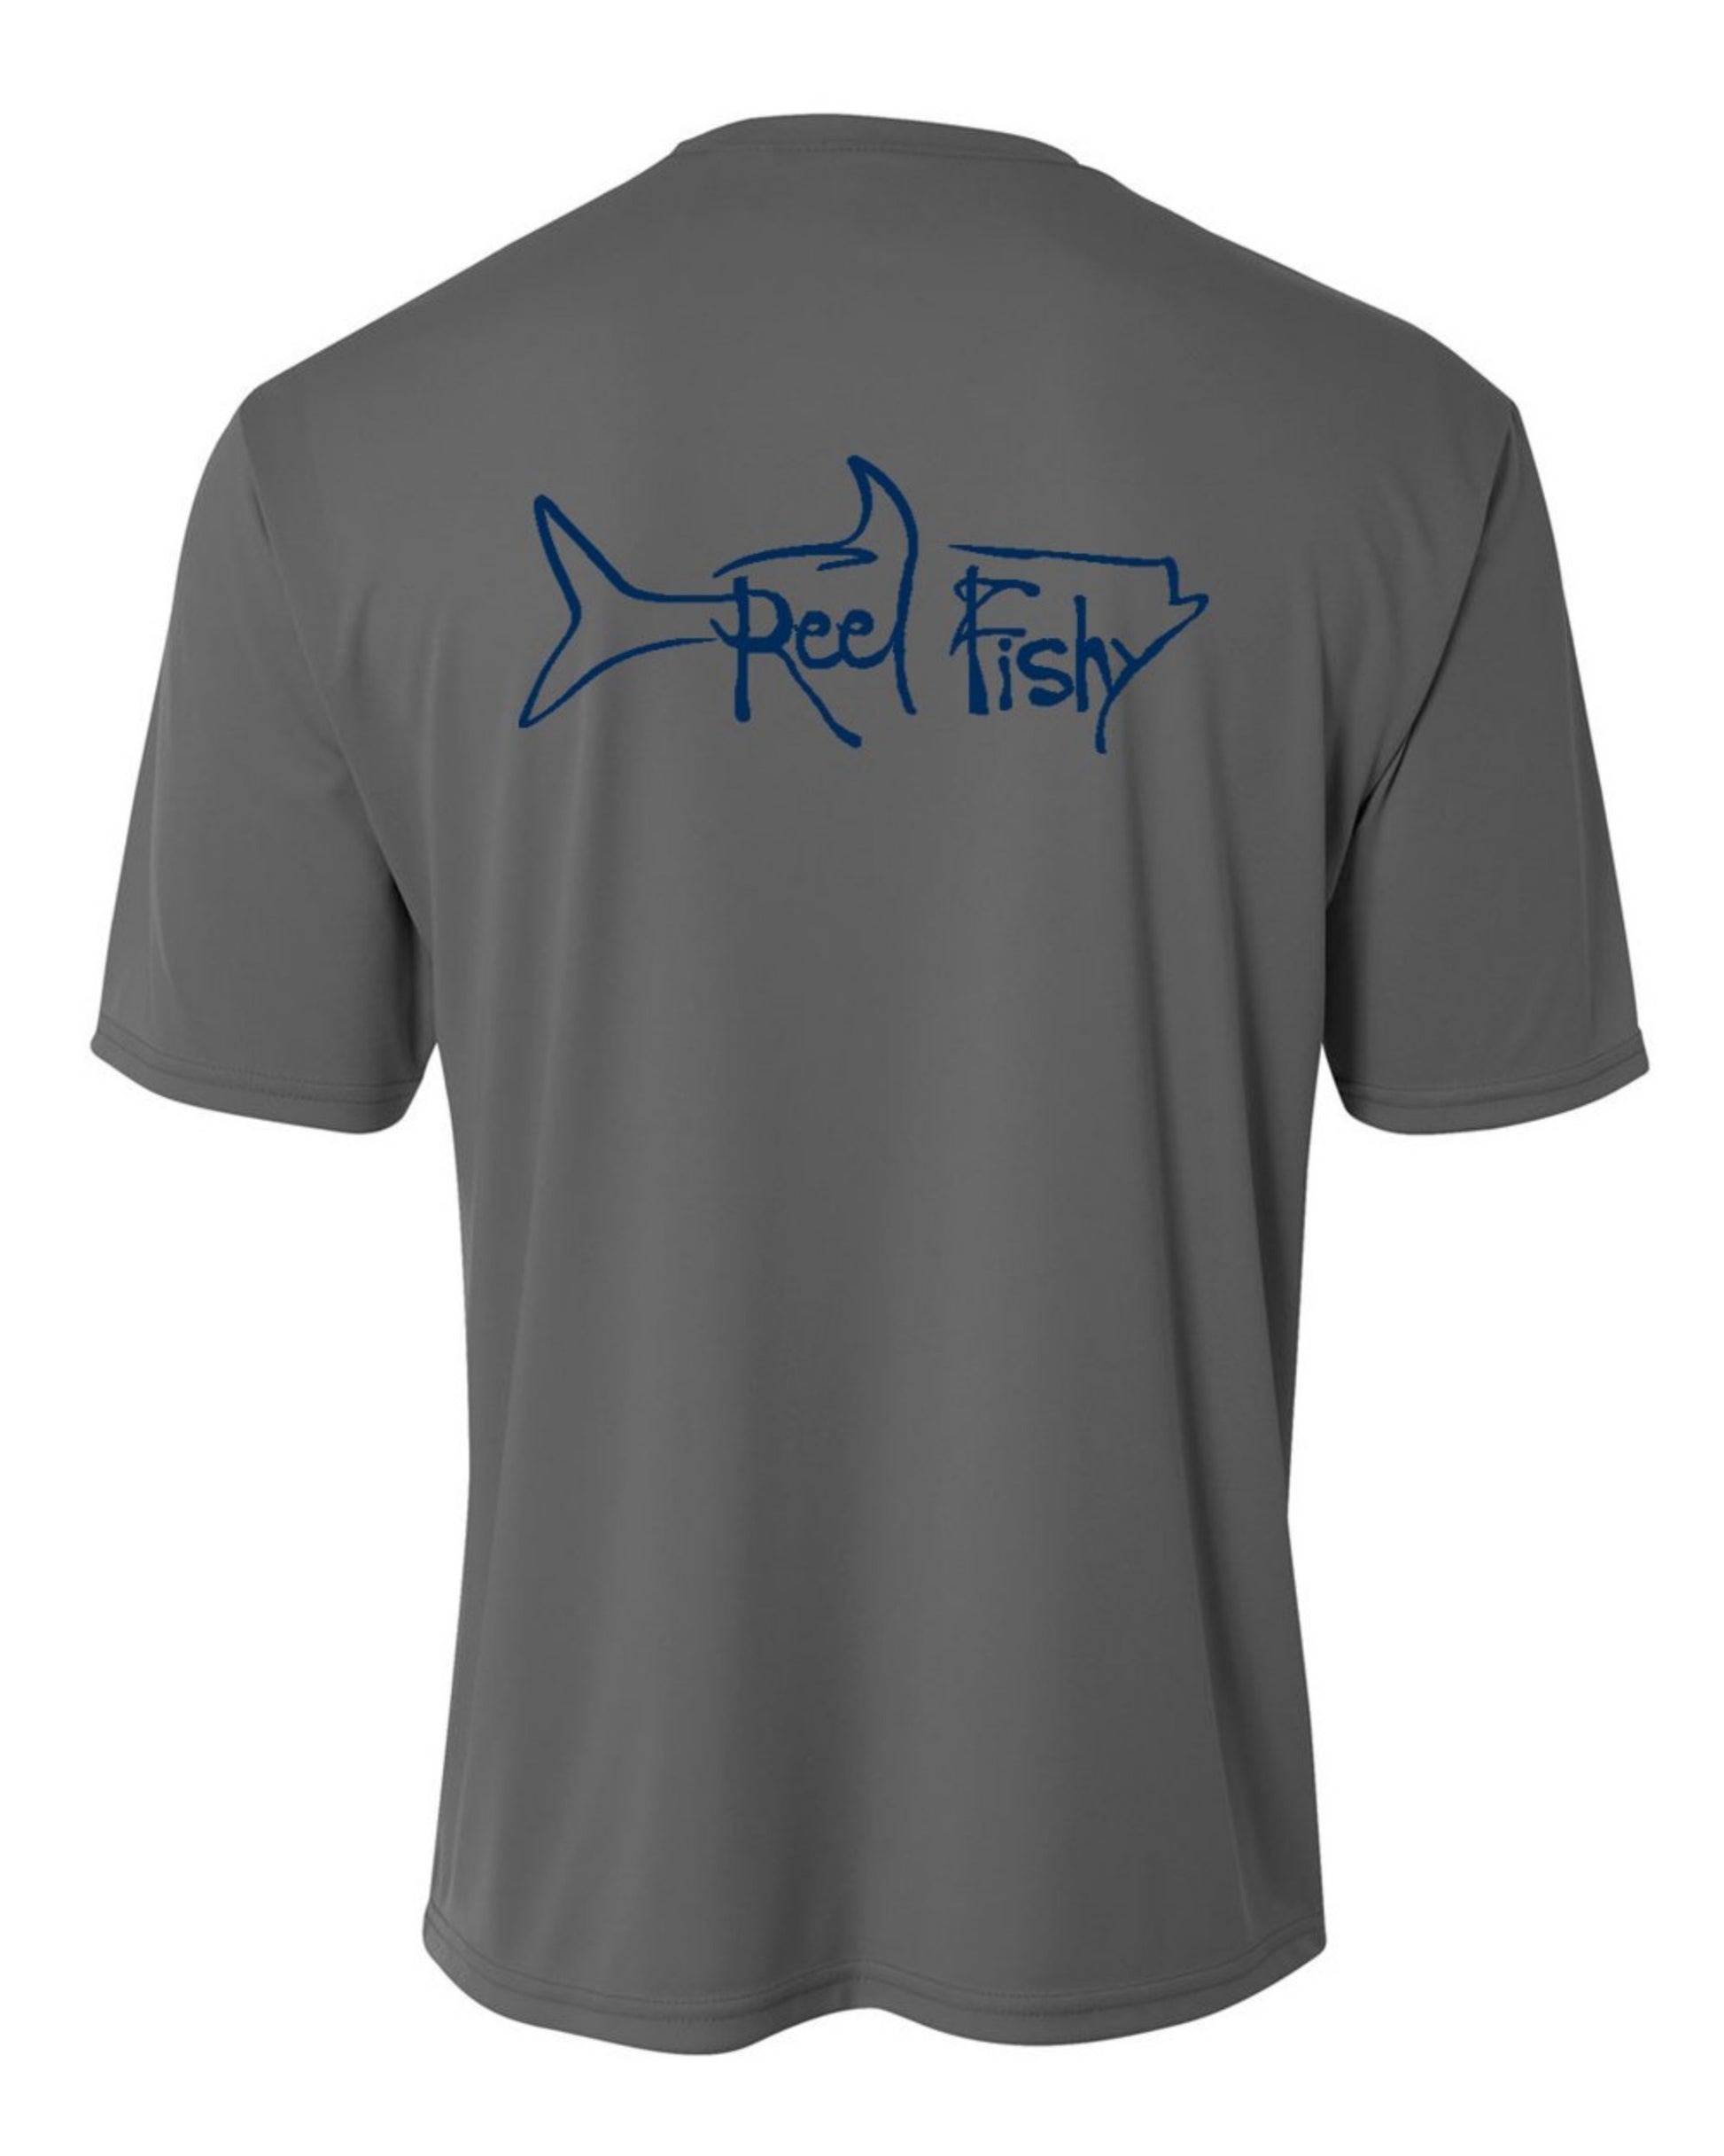 Youth Performance Dry-Fit Tarpon Fishing Shirts with Sun Protection by Reel Fishy Apparel - Short Sleeve Red